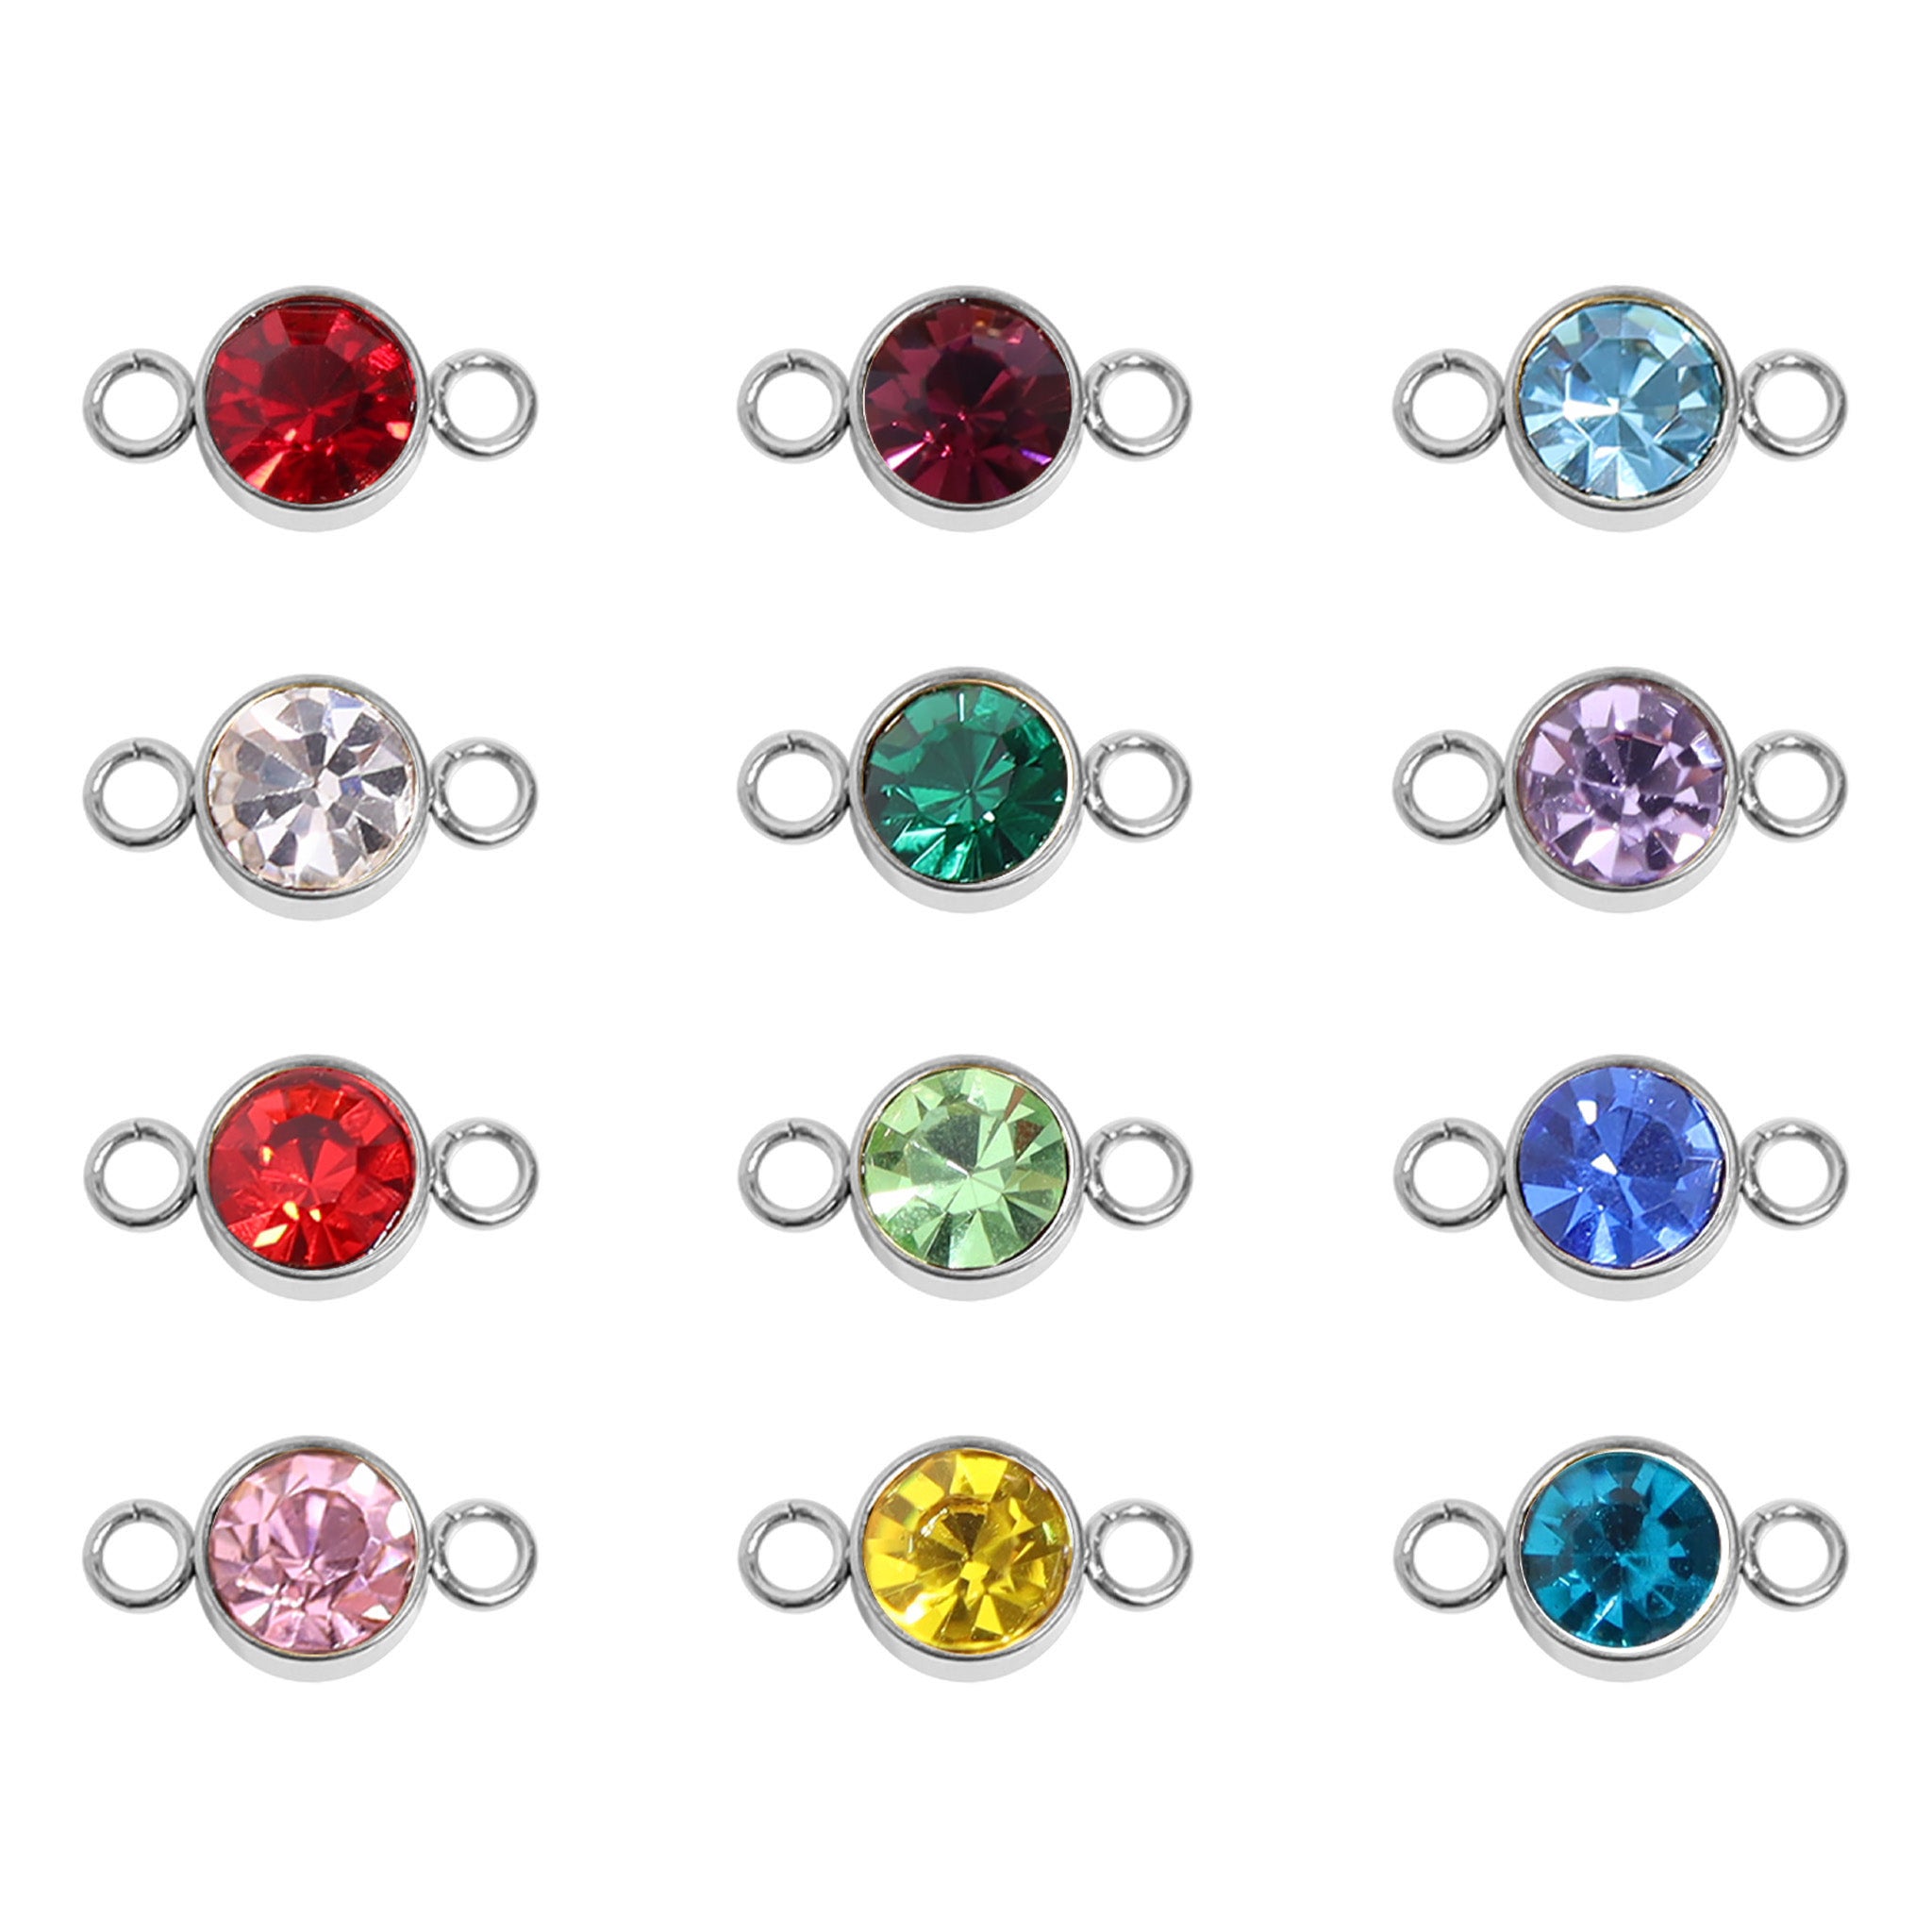 Stainless Steel Round Cubic Zirconia Birthstone Connector Charm / PDL0121